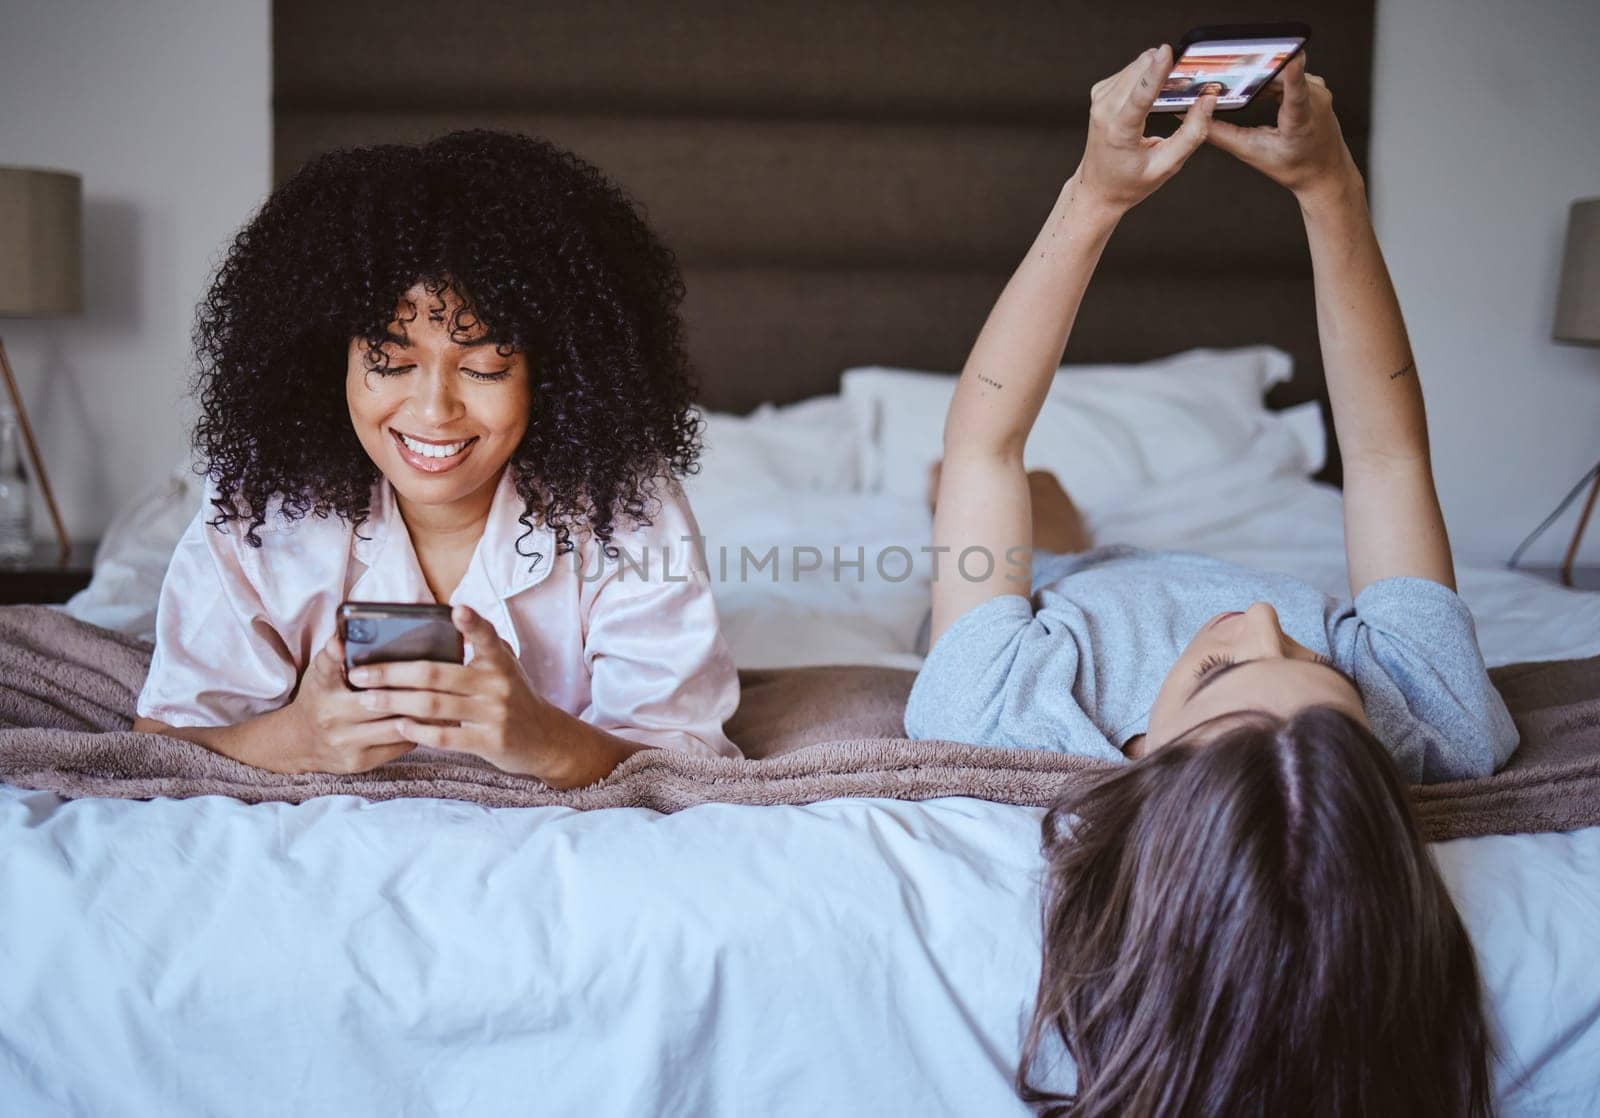 Video call, phone and friends with women at sleepover for communication, internet and contact. Happy, relax and smile with girl lying in bedroom with technology, digital and social media together.